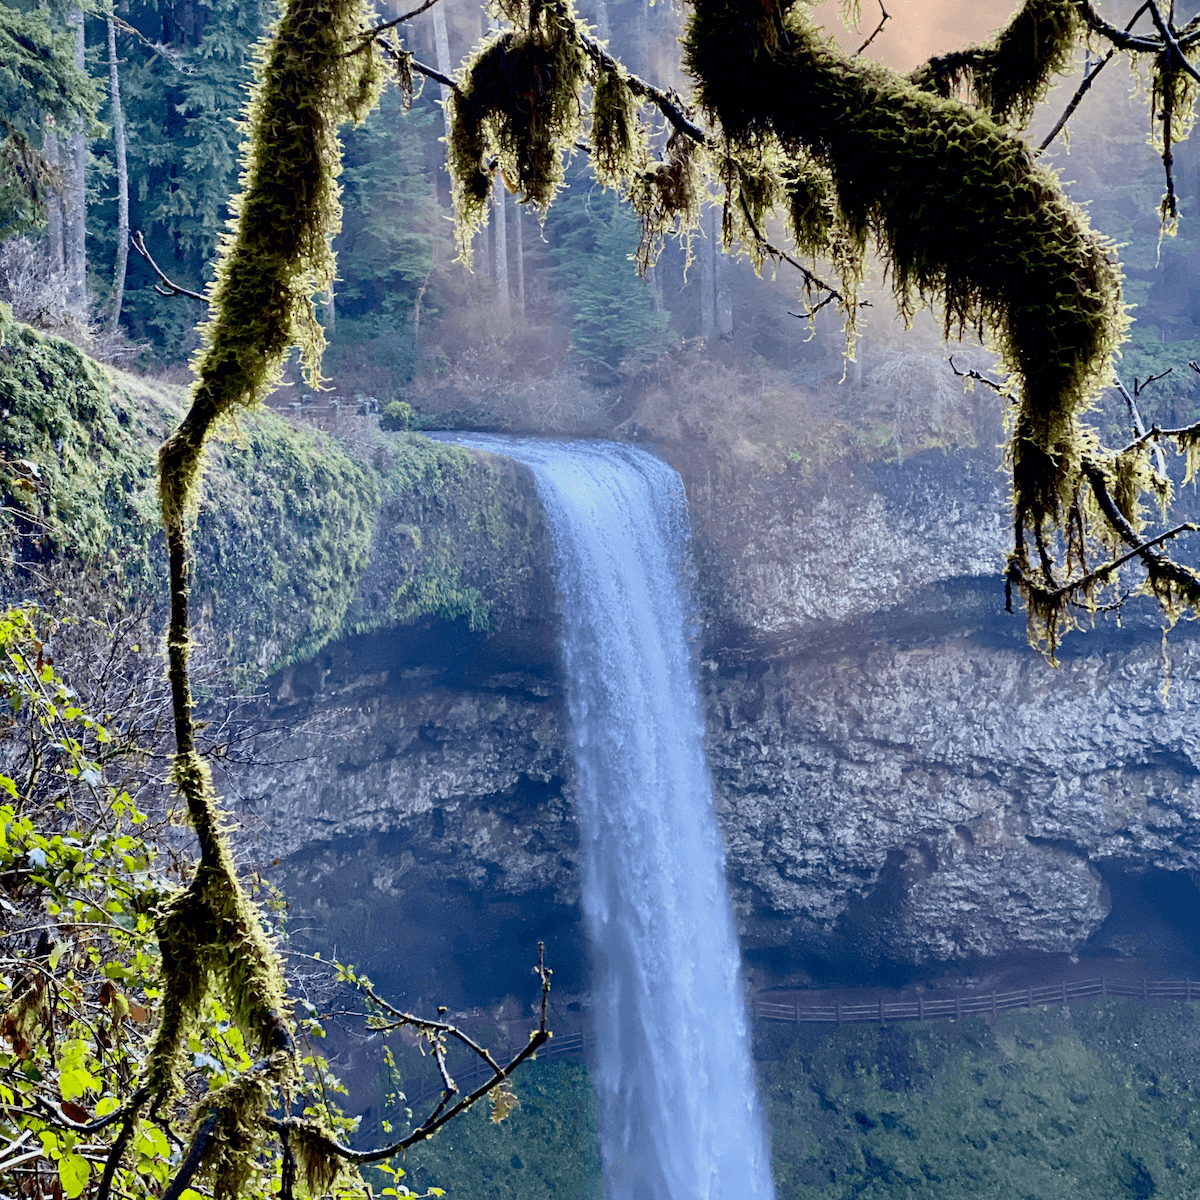 A waterfall glides over volcanic rock while a moss lined tree branch hangs in the way. Toward the bottom of the waterfall there is a path with fence that meander behind the powerful blast of water.